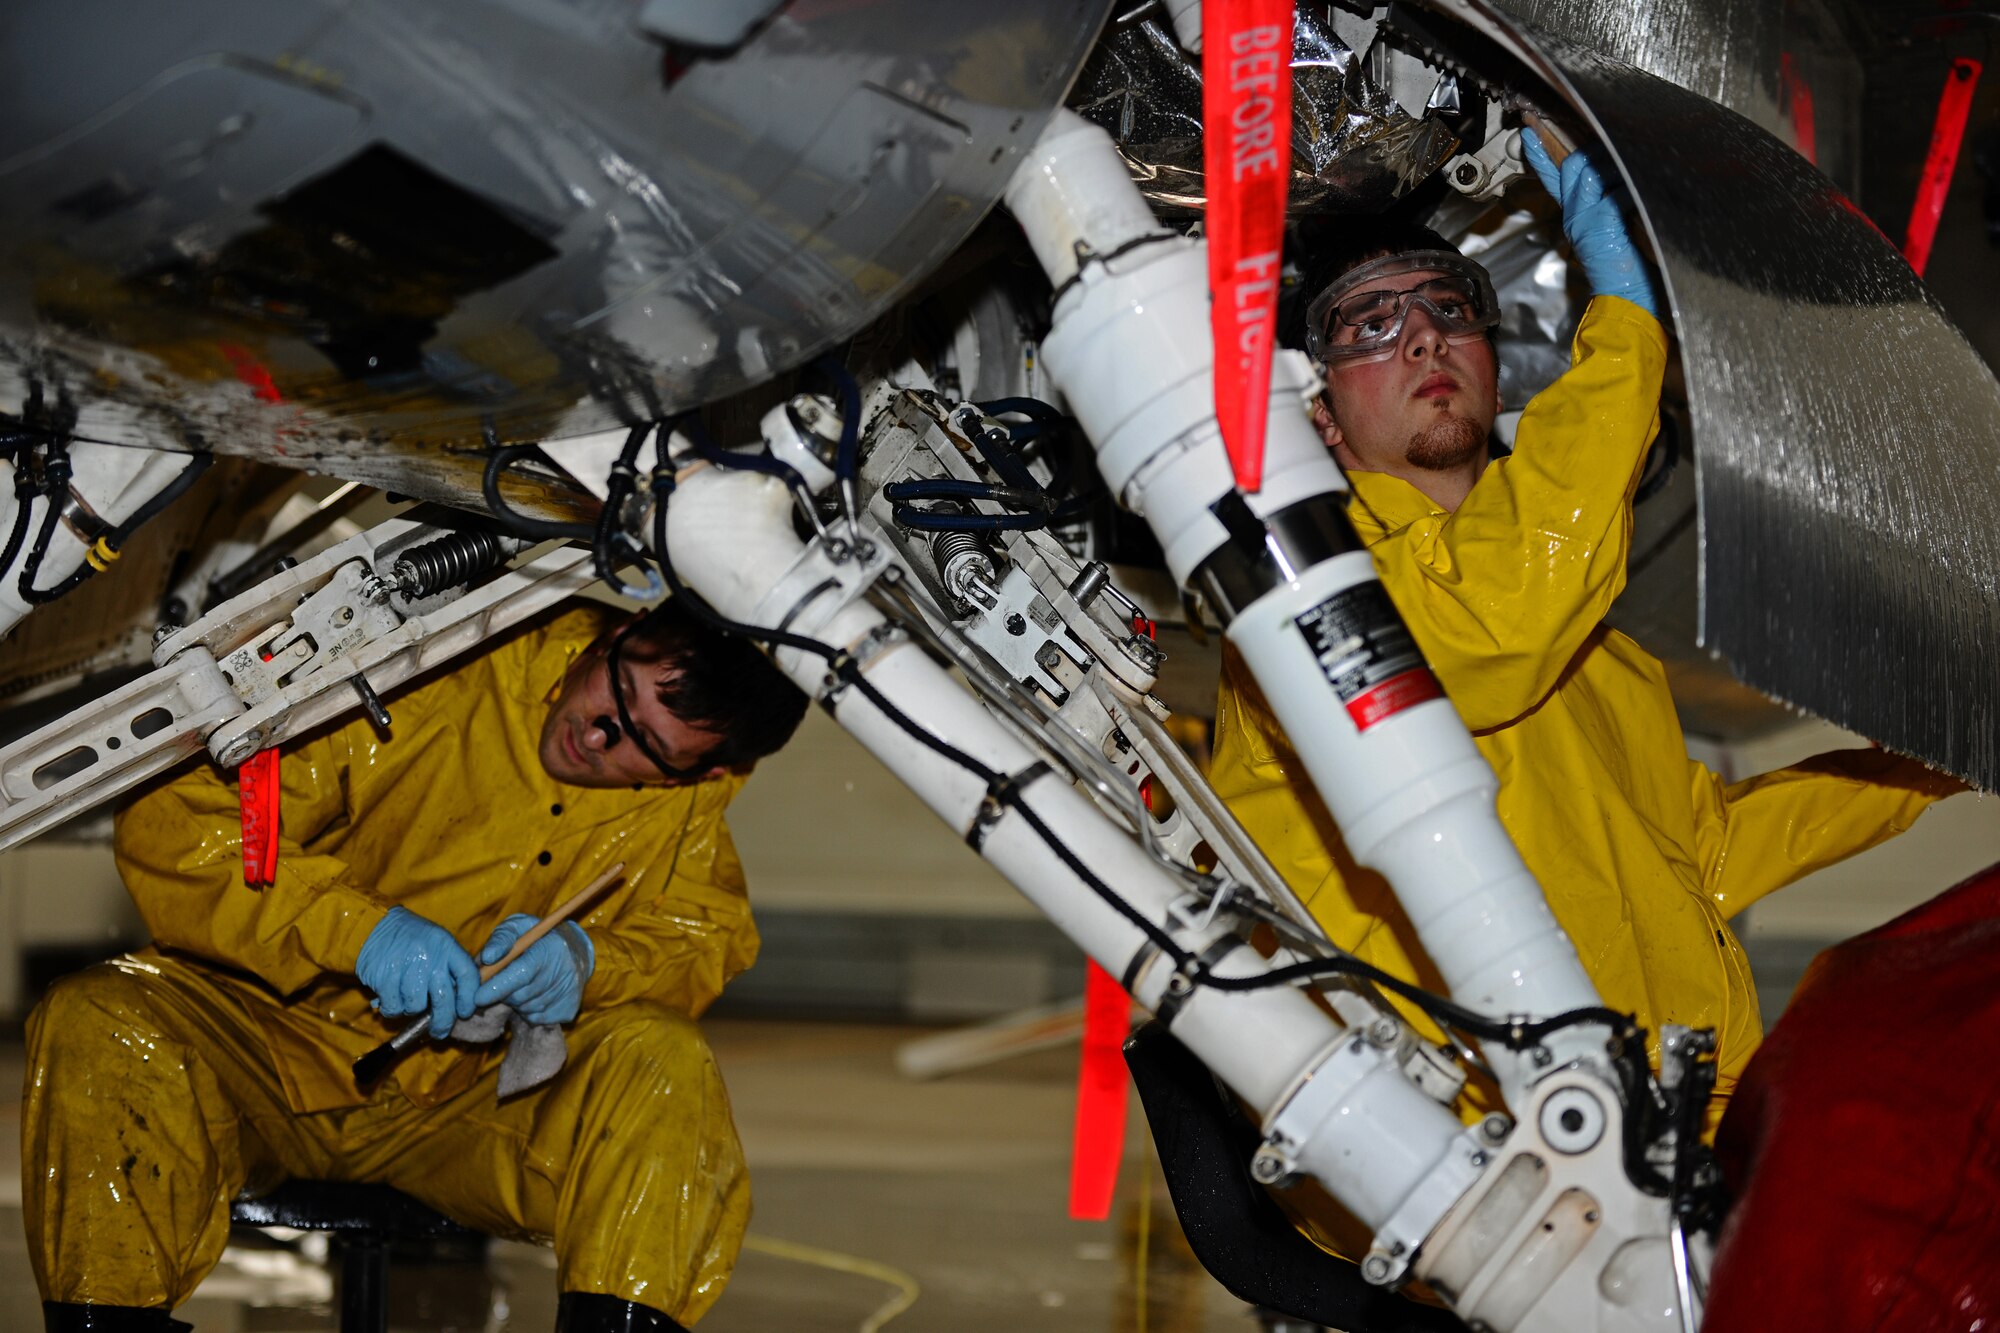 SPANGDAHLEM AIR BASE, Germany – Josh Larkin, left, and Adam Chapman, 52nd Equipment Maintenance Squadron Fabrication Flight corrosion control civilian contractors, clean the landing gear on an F-16 Fighting Falcon in Hangar 3 here May 11. The fabrication flight contractors wash every 52nd Fighter Wing aircraft twice a year to prevent corrosion and extend the lifespan of the aircraft. (U.S. Air Force photo by Airman 1st Class Matthew B. Fredericks/Released)